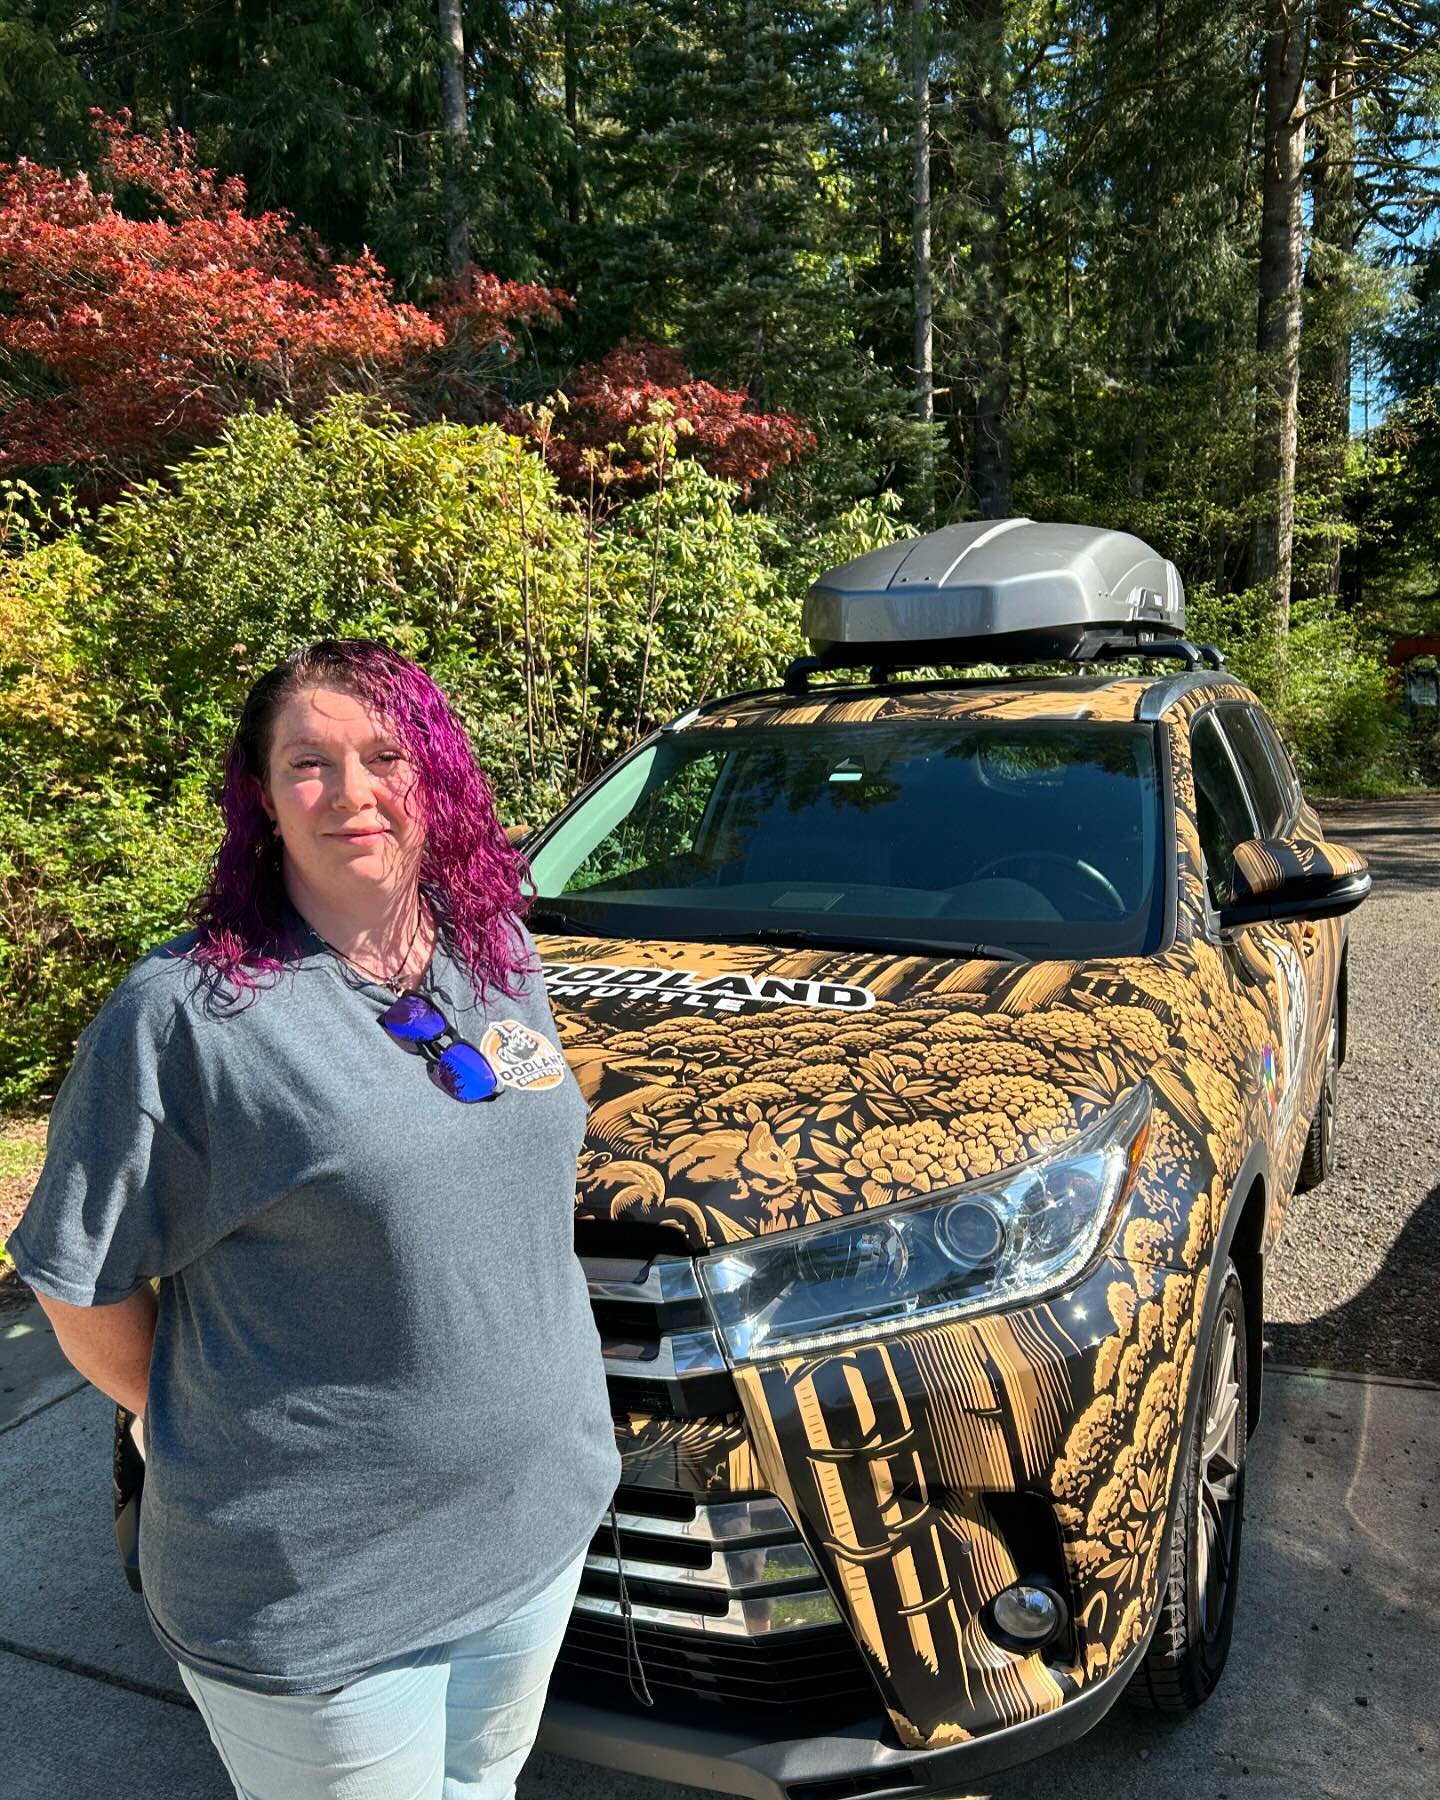 Driver Spotlight! Cill is a fantastic addition to the team! She brings her winter resort bus experience and CDL to the Hoodland Shuttle team. Cill will be driving tonight till 2 am to get you home safe!! 

#connectingcommunities #hoodlandshuttle #shu